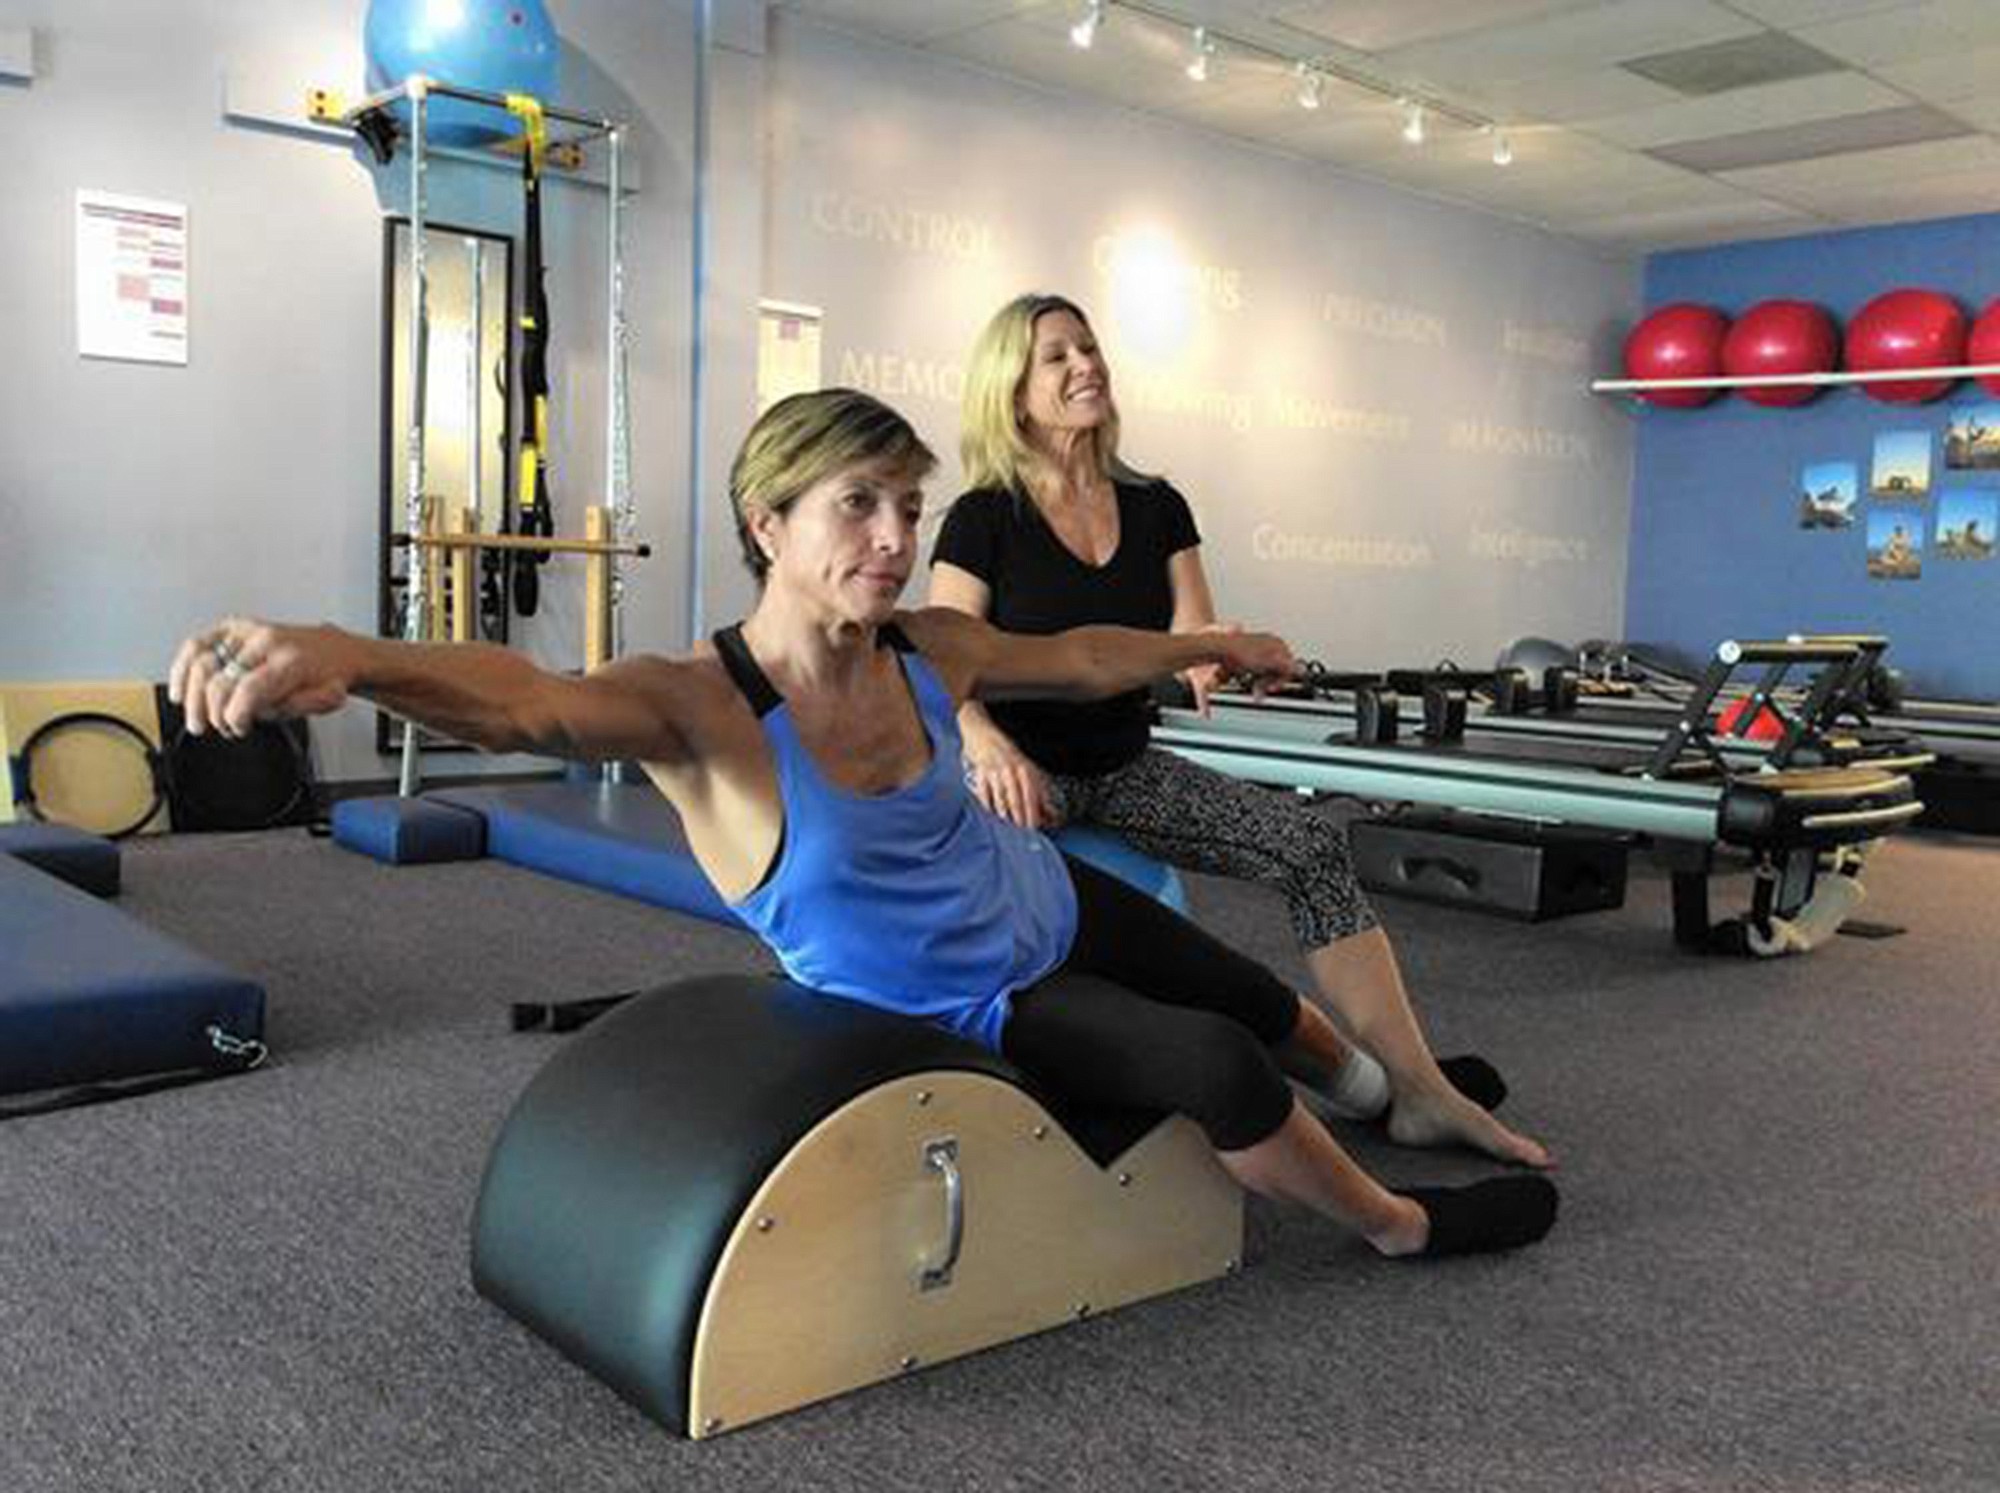 Delyn VanDyke, 52, who was hurt in a motorcycle crash in 2012, works to strengthen her body with trainer Tina Stathis, 48, at Tru Pilates and Yoga Studio in Altamonte Springs, Fla.